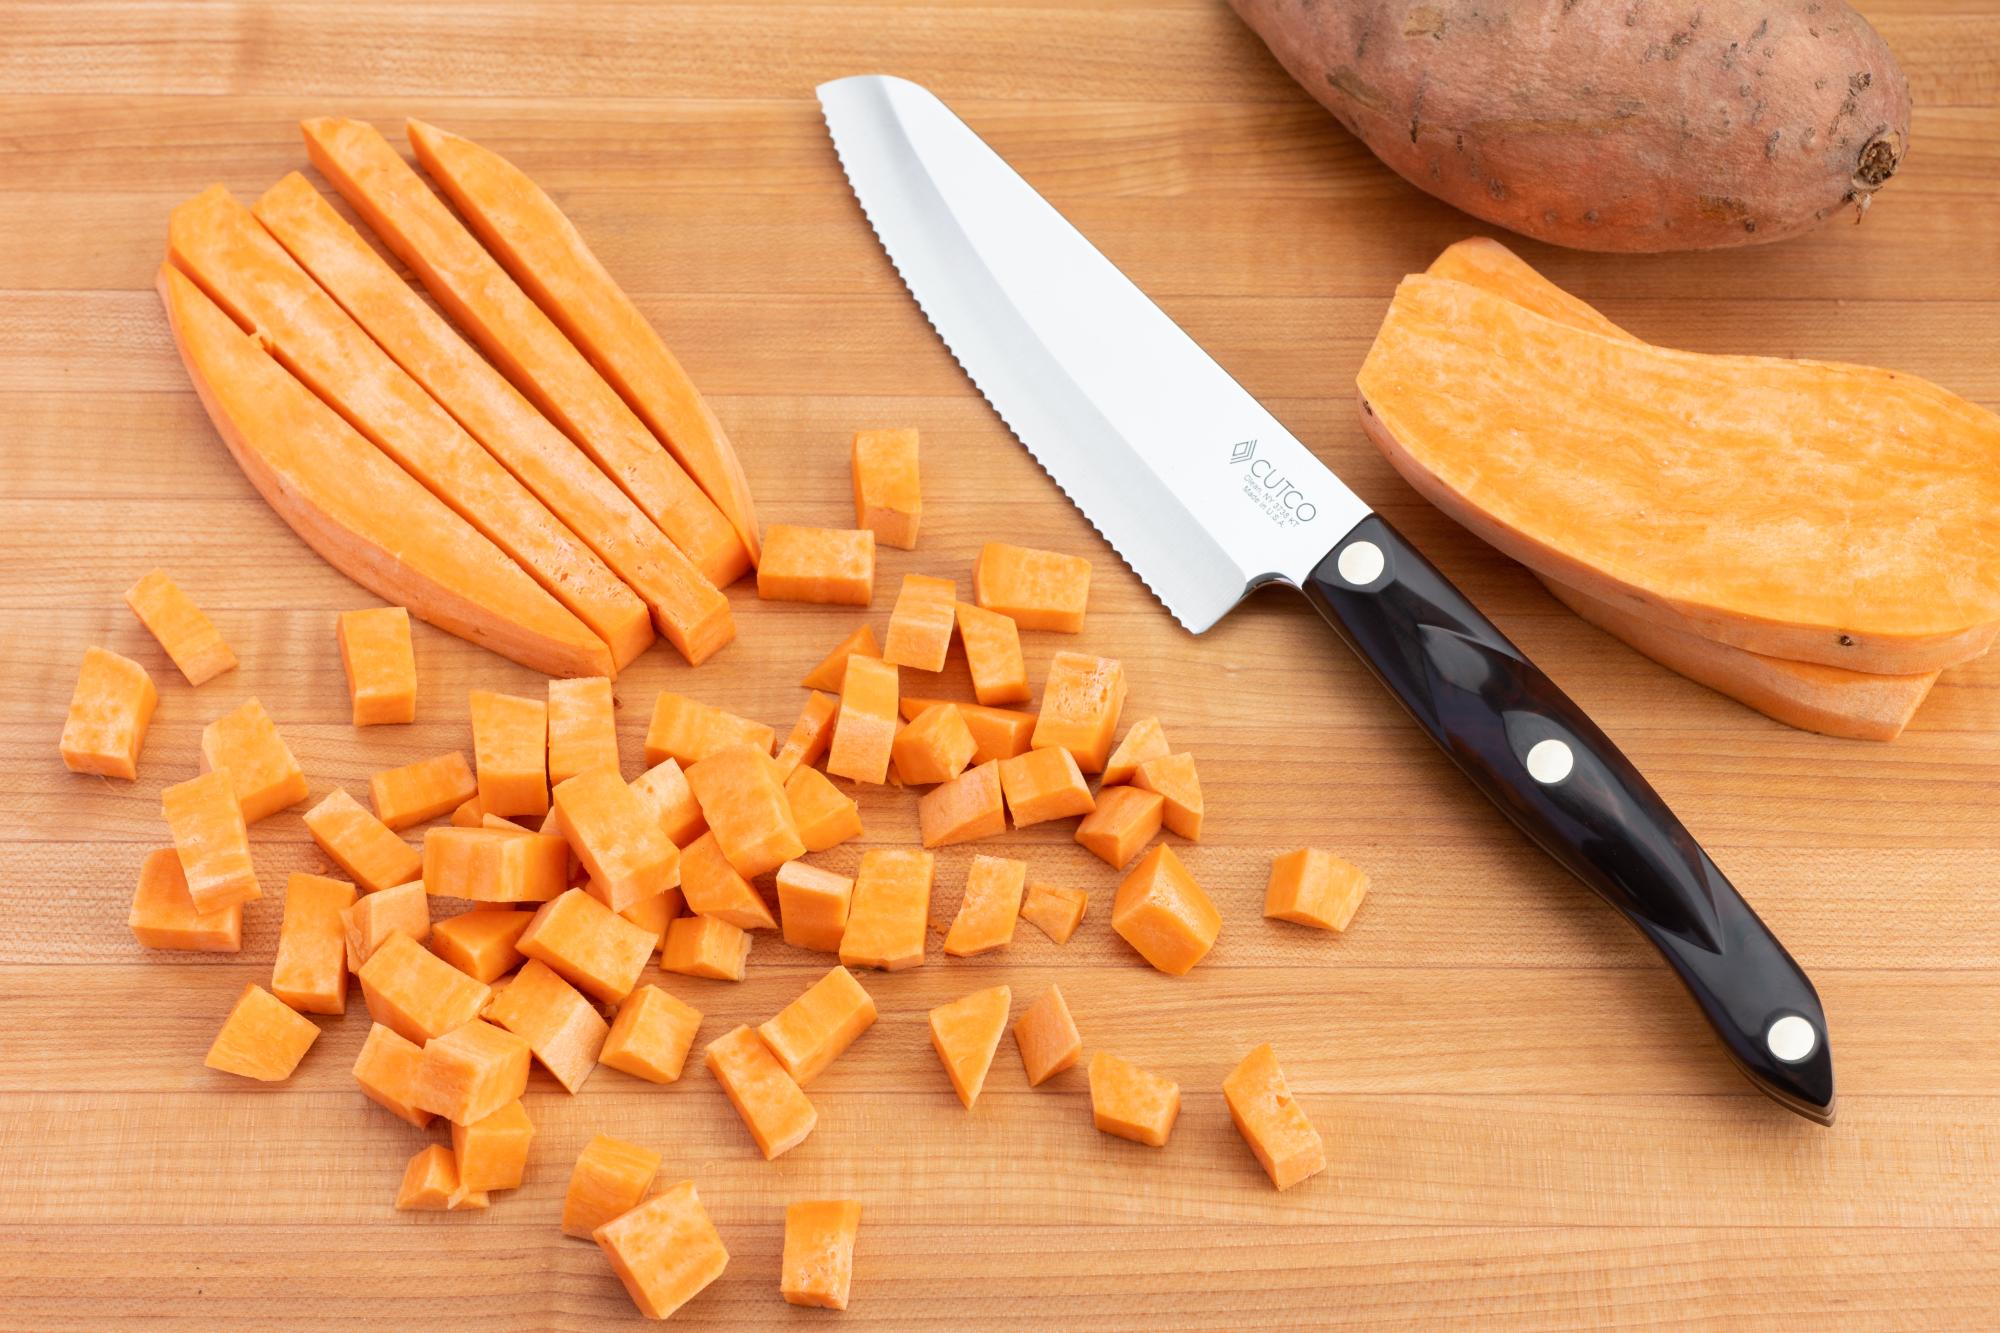 Cutting the sweet potatoes with a Hardy Slicer.